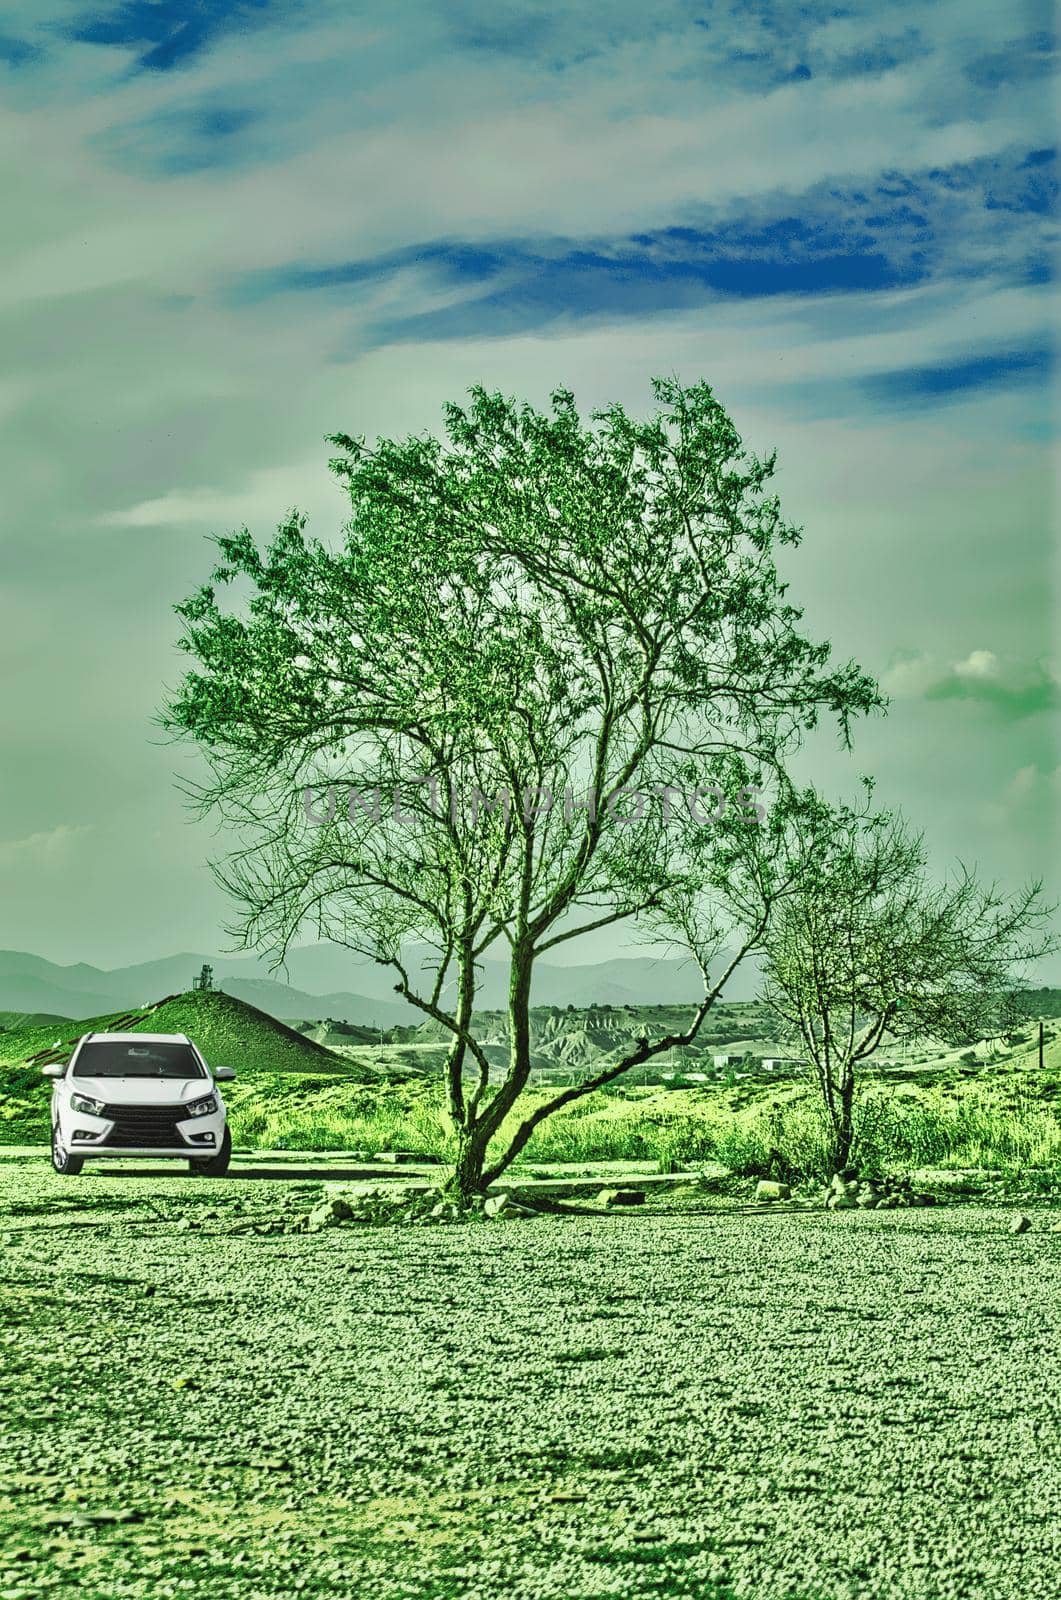 Tree green and white car. Against a blue sky and clouds. The village landscape. by Essffes